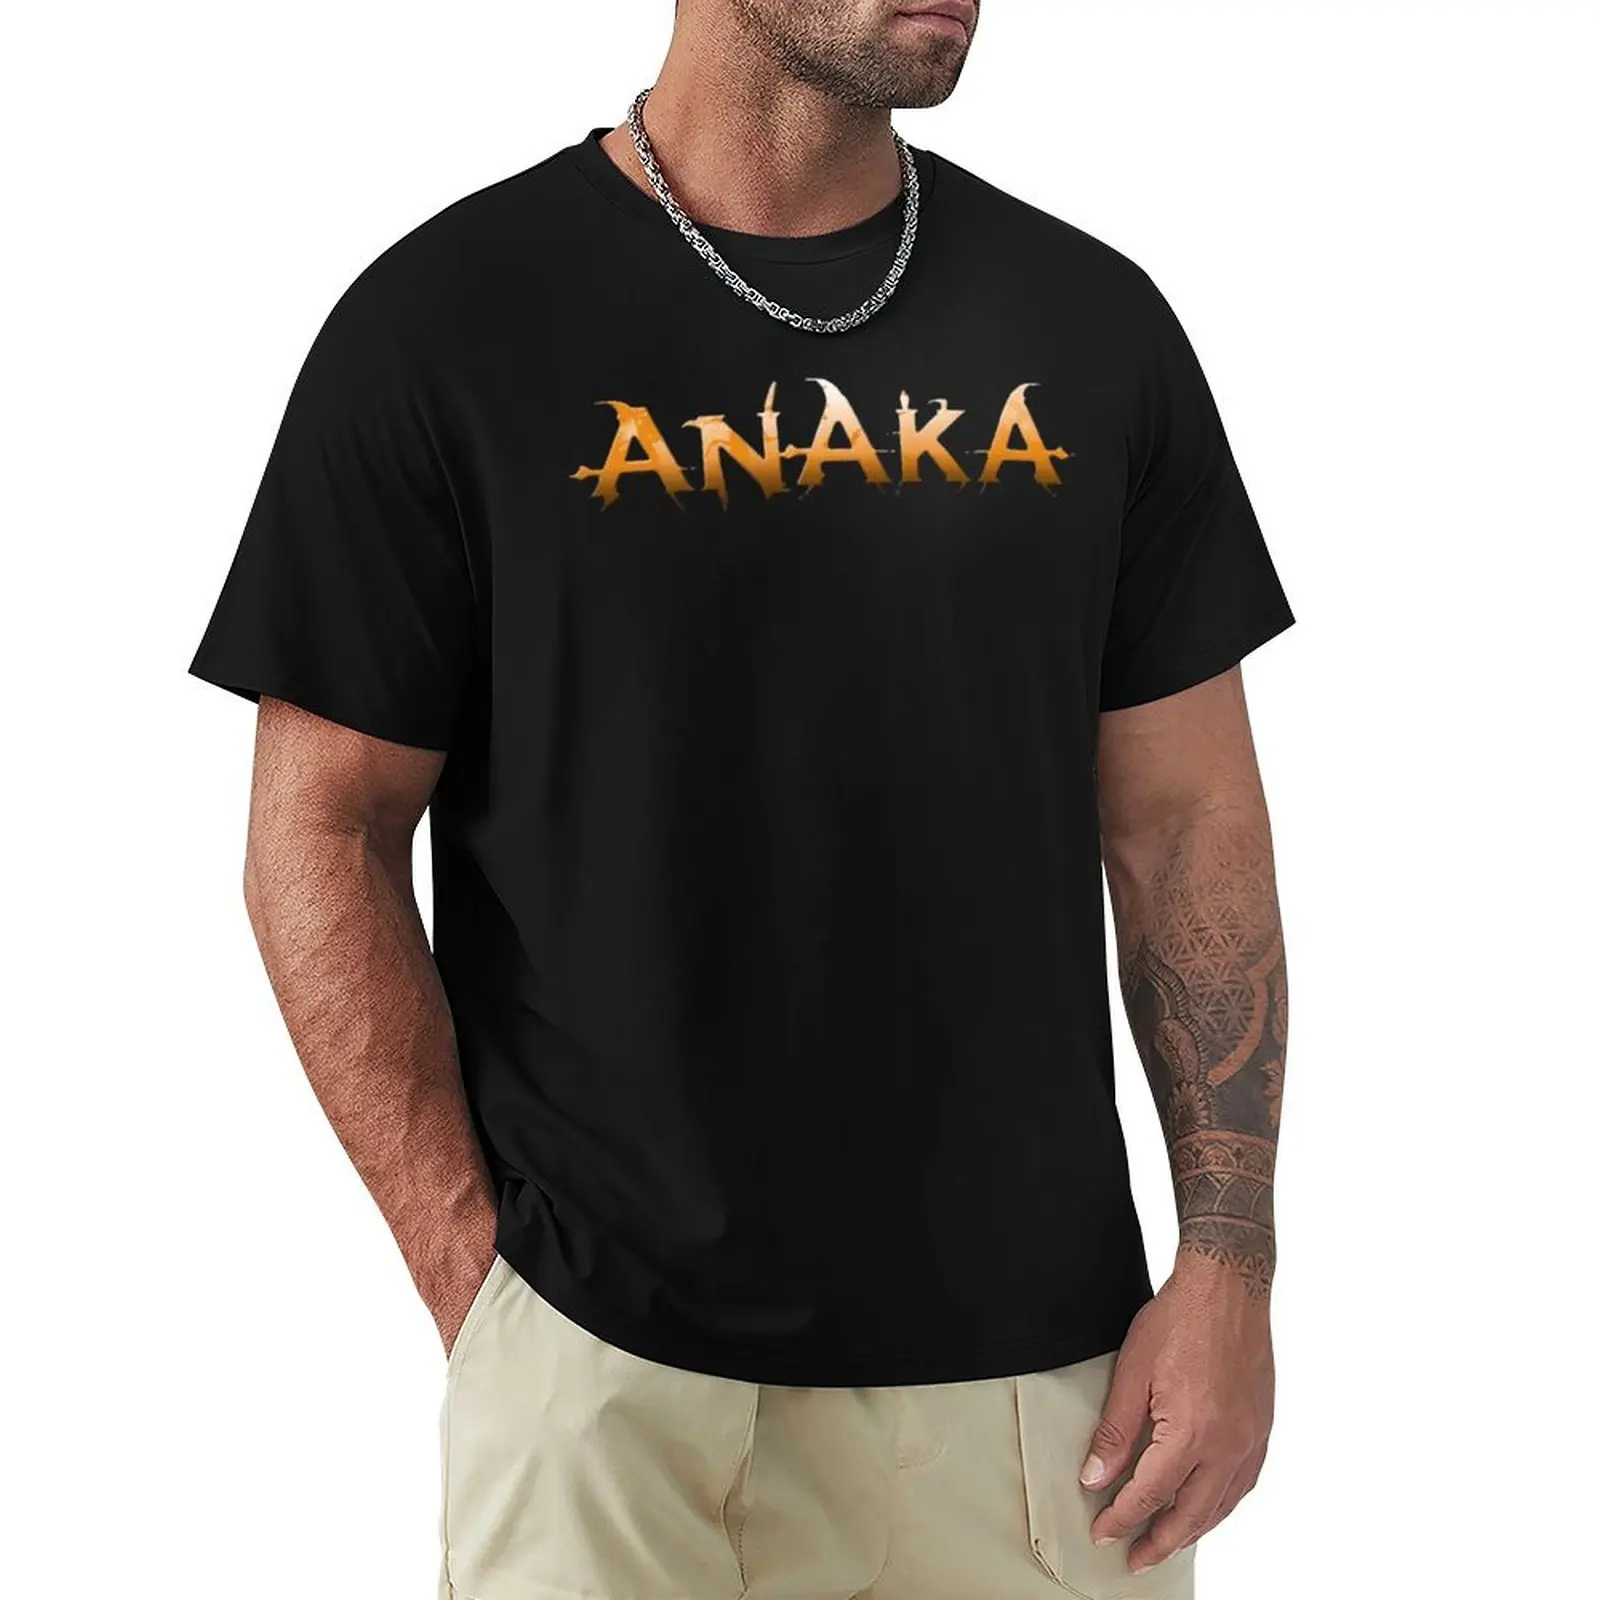 Anaka rock band American Essential T T-Shirt Blouse tees Aesthetic clothing hippie clothes men graphic t shirts